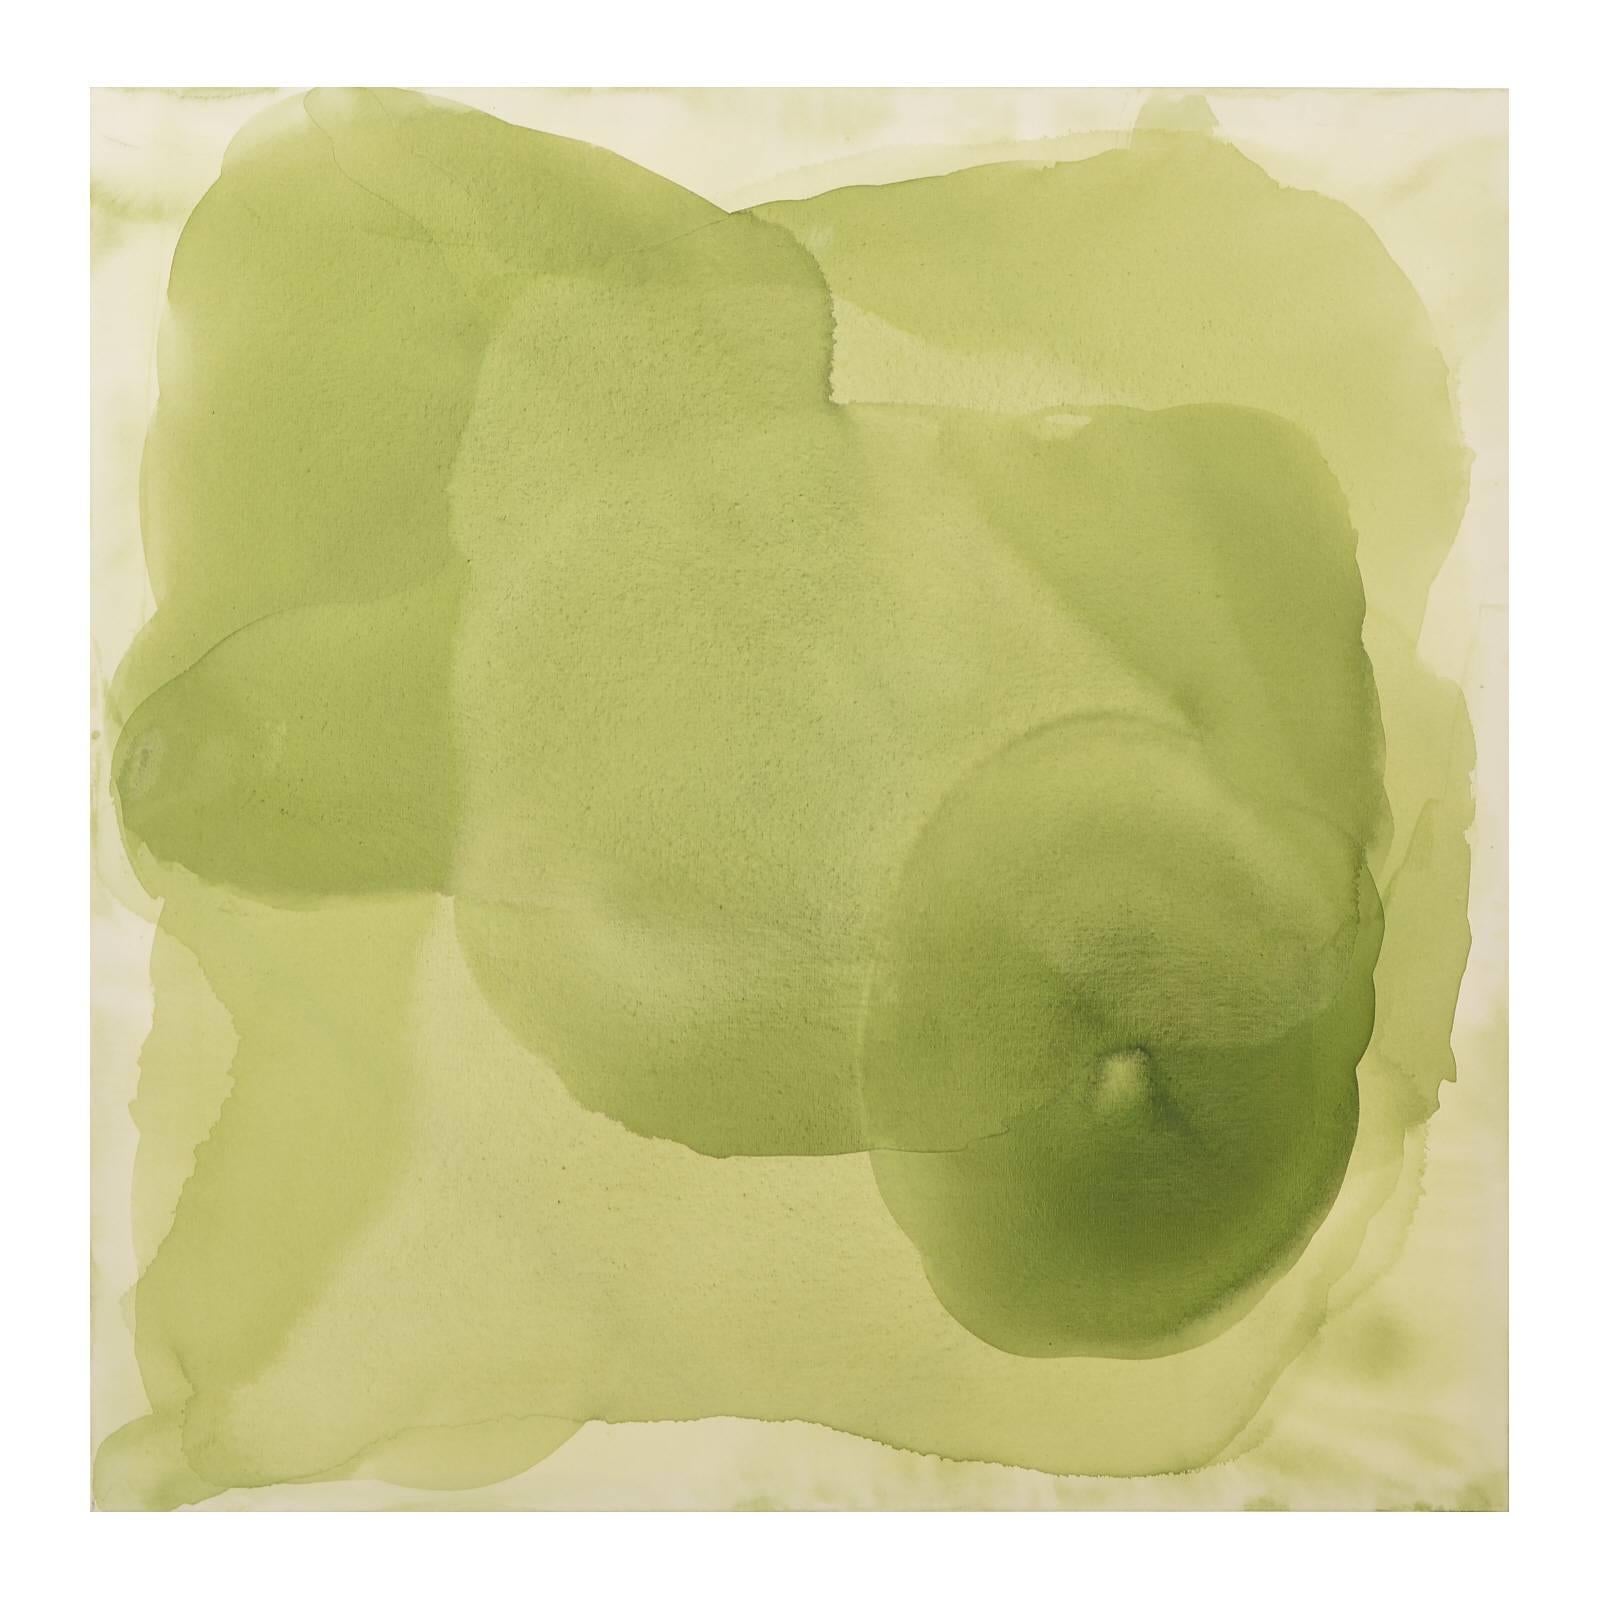 This lovely and ethereal abstract painting in shades of warm green looks as if it could be a watercolor, but its not. Layers of translucent green have been carefully applied to this large gallery wrapped canvas. This is an original painting by